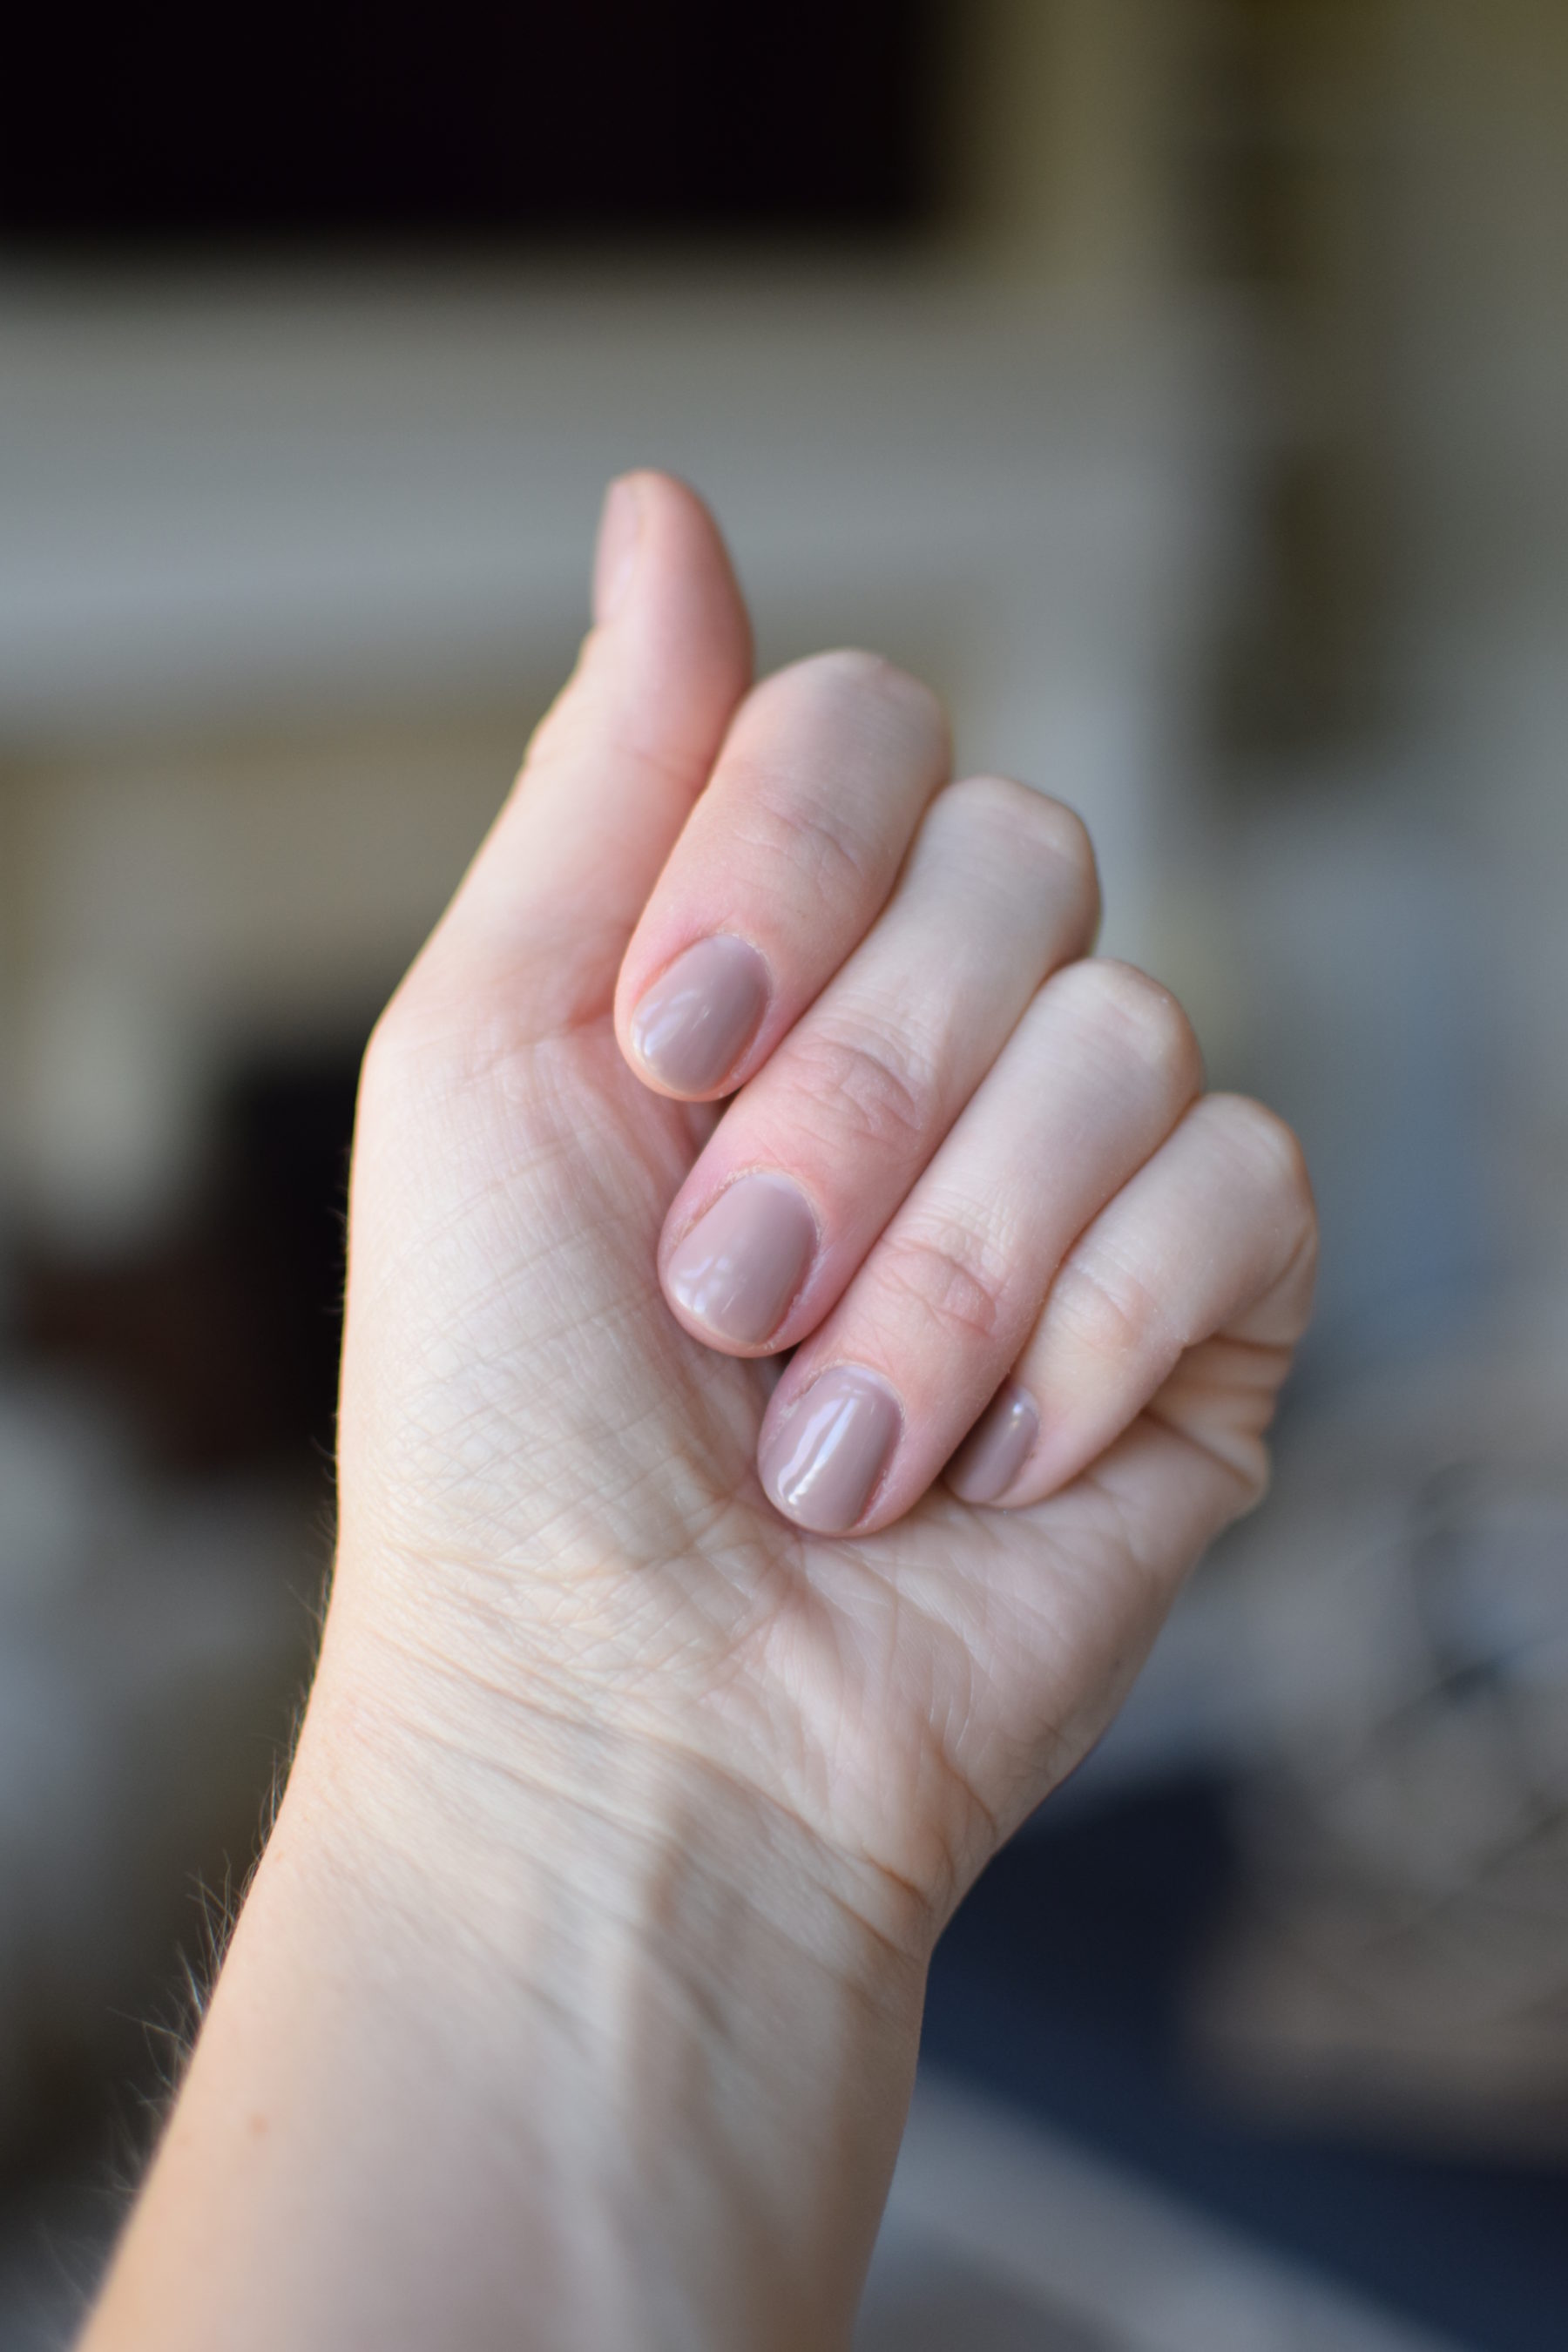 At home gel manicures are not as hard as you think